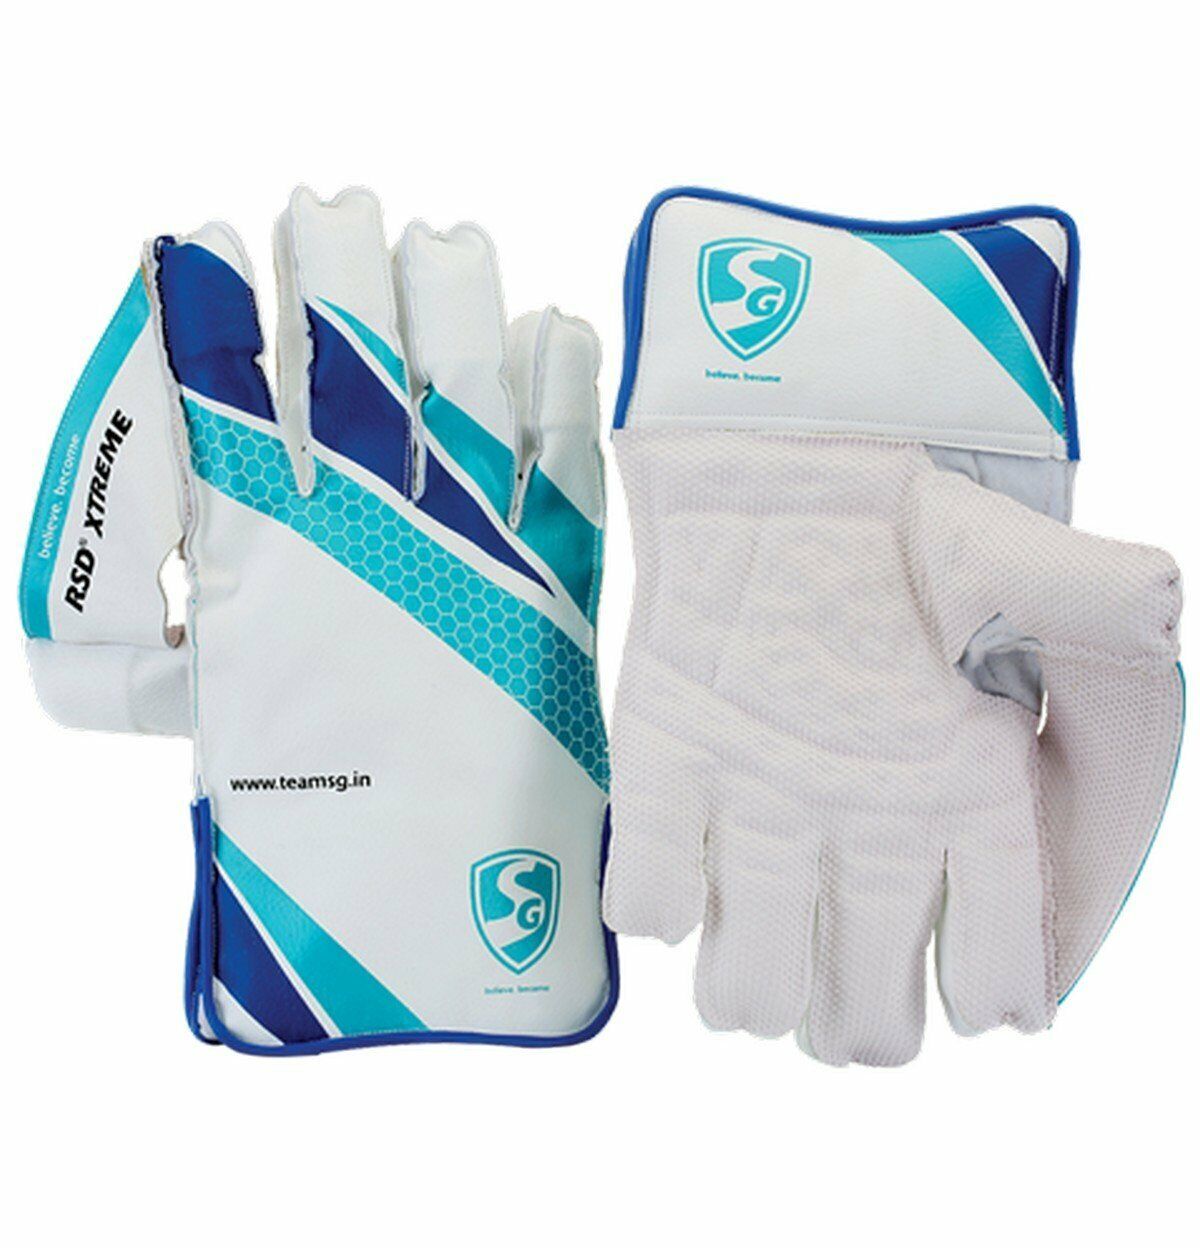 Sg Rsd Xtreme Wicket Keeping Gloves (Assorted)